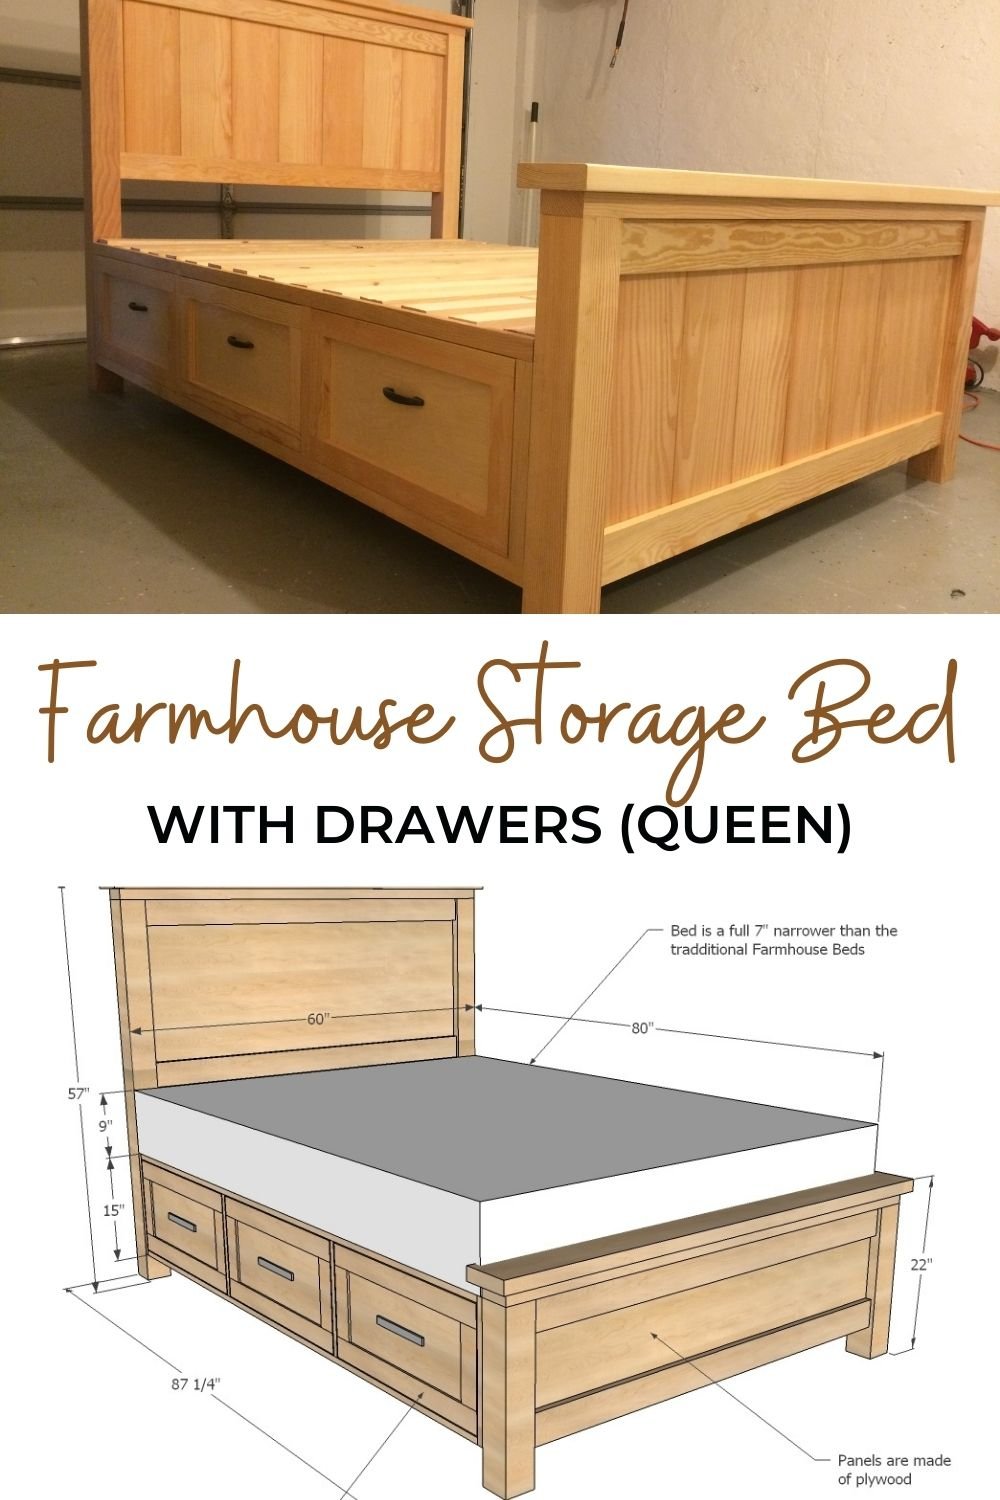 Farmhouse Storage Bed With Drawers, Diy King Size Bookcase Headboard Plans